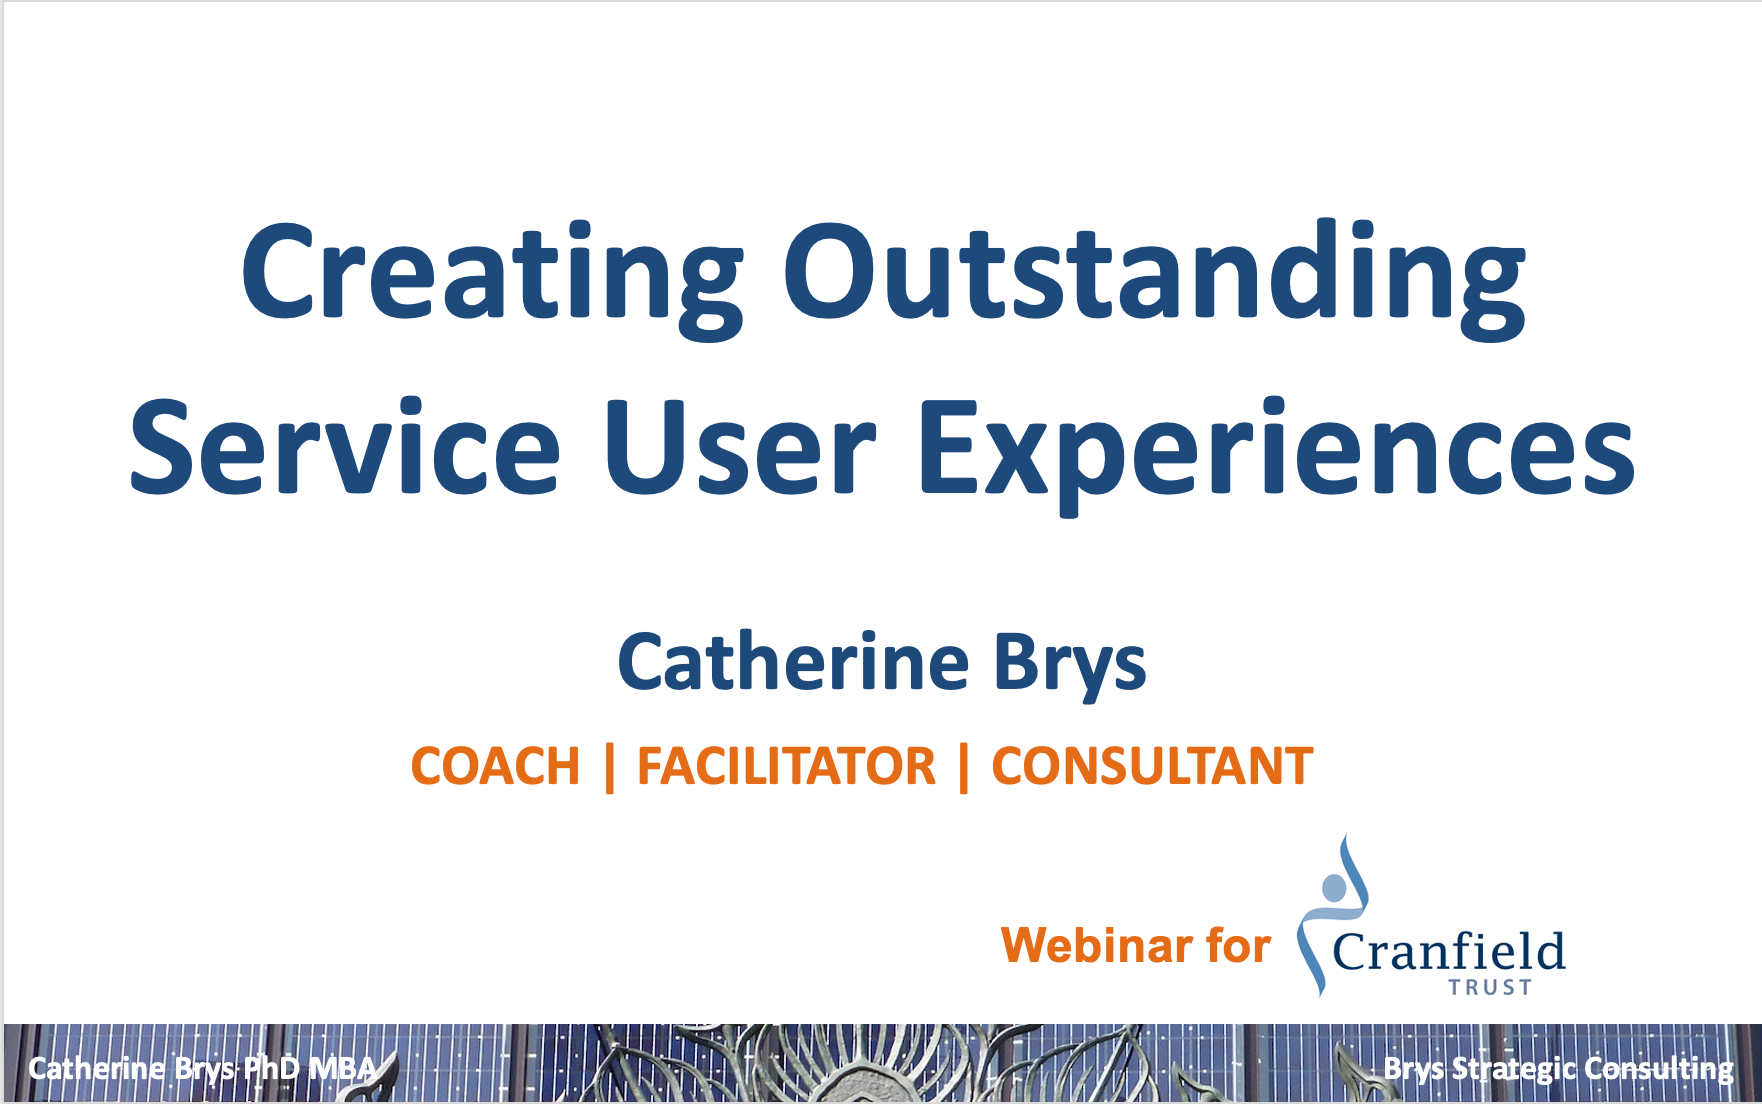 Title slide of the webinar: Creating Outstanding Service User Experiences